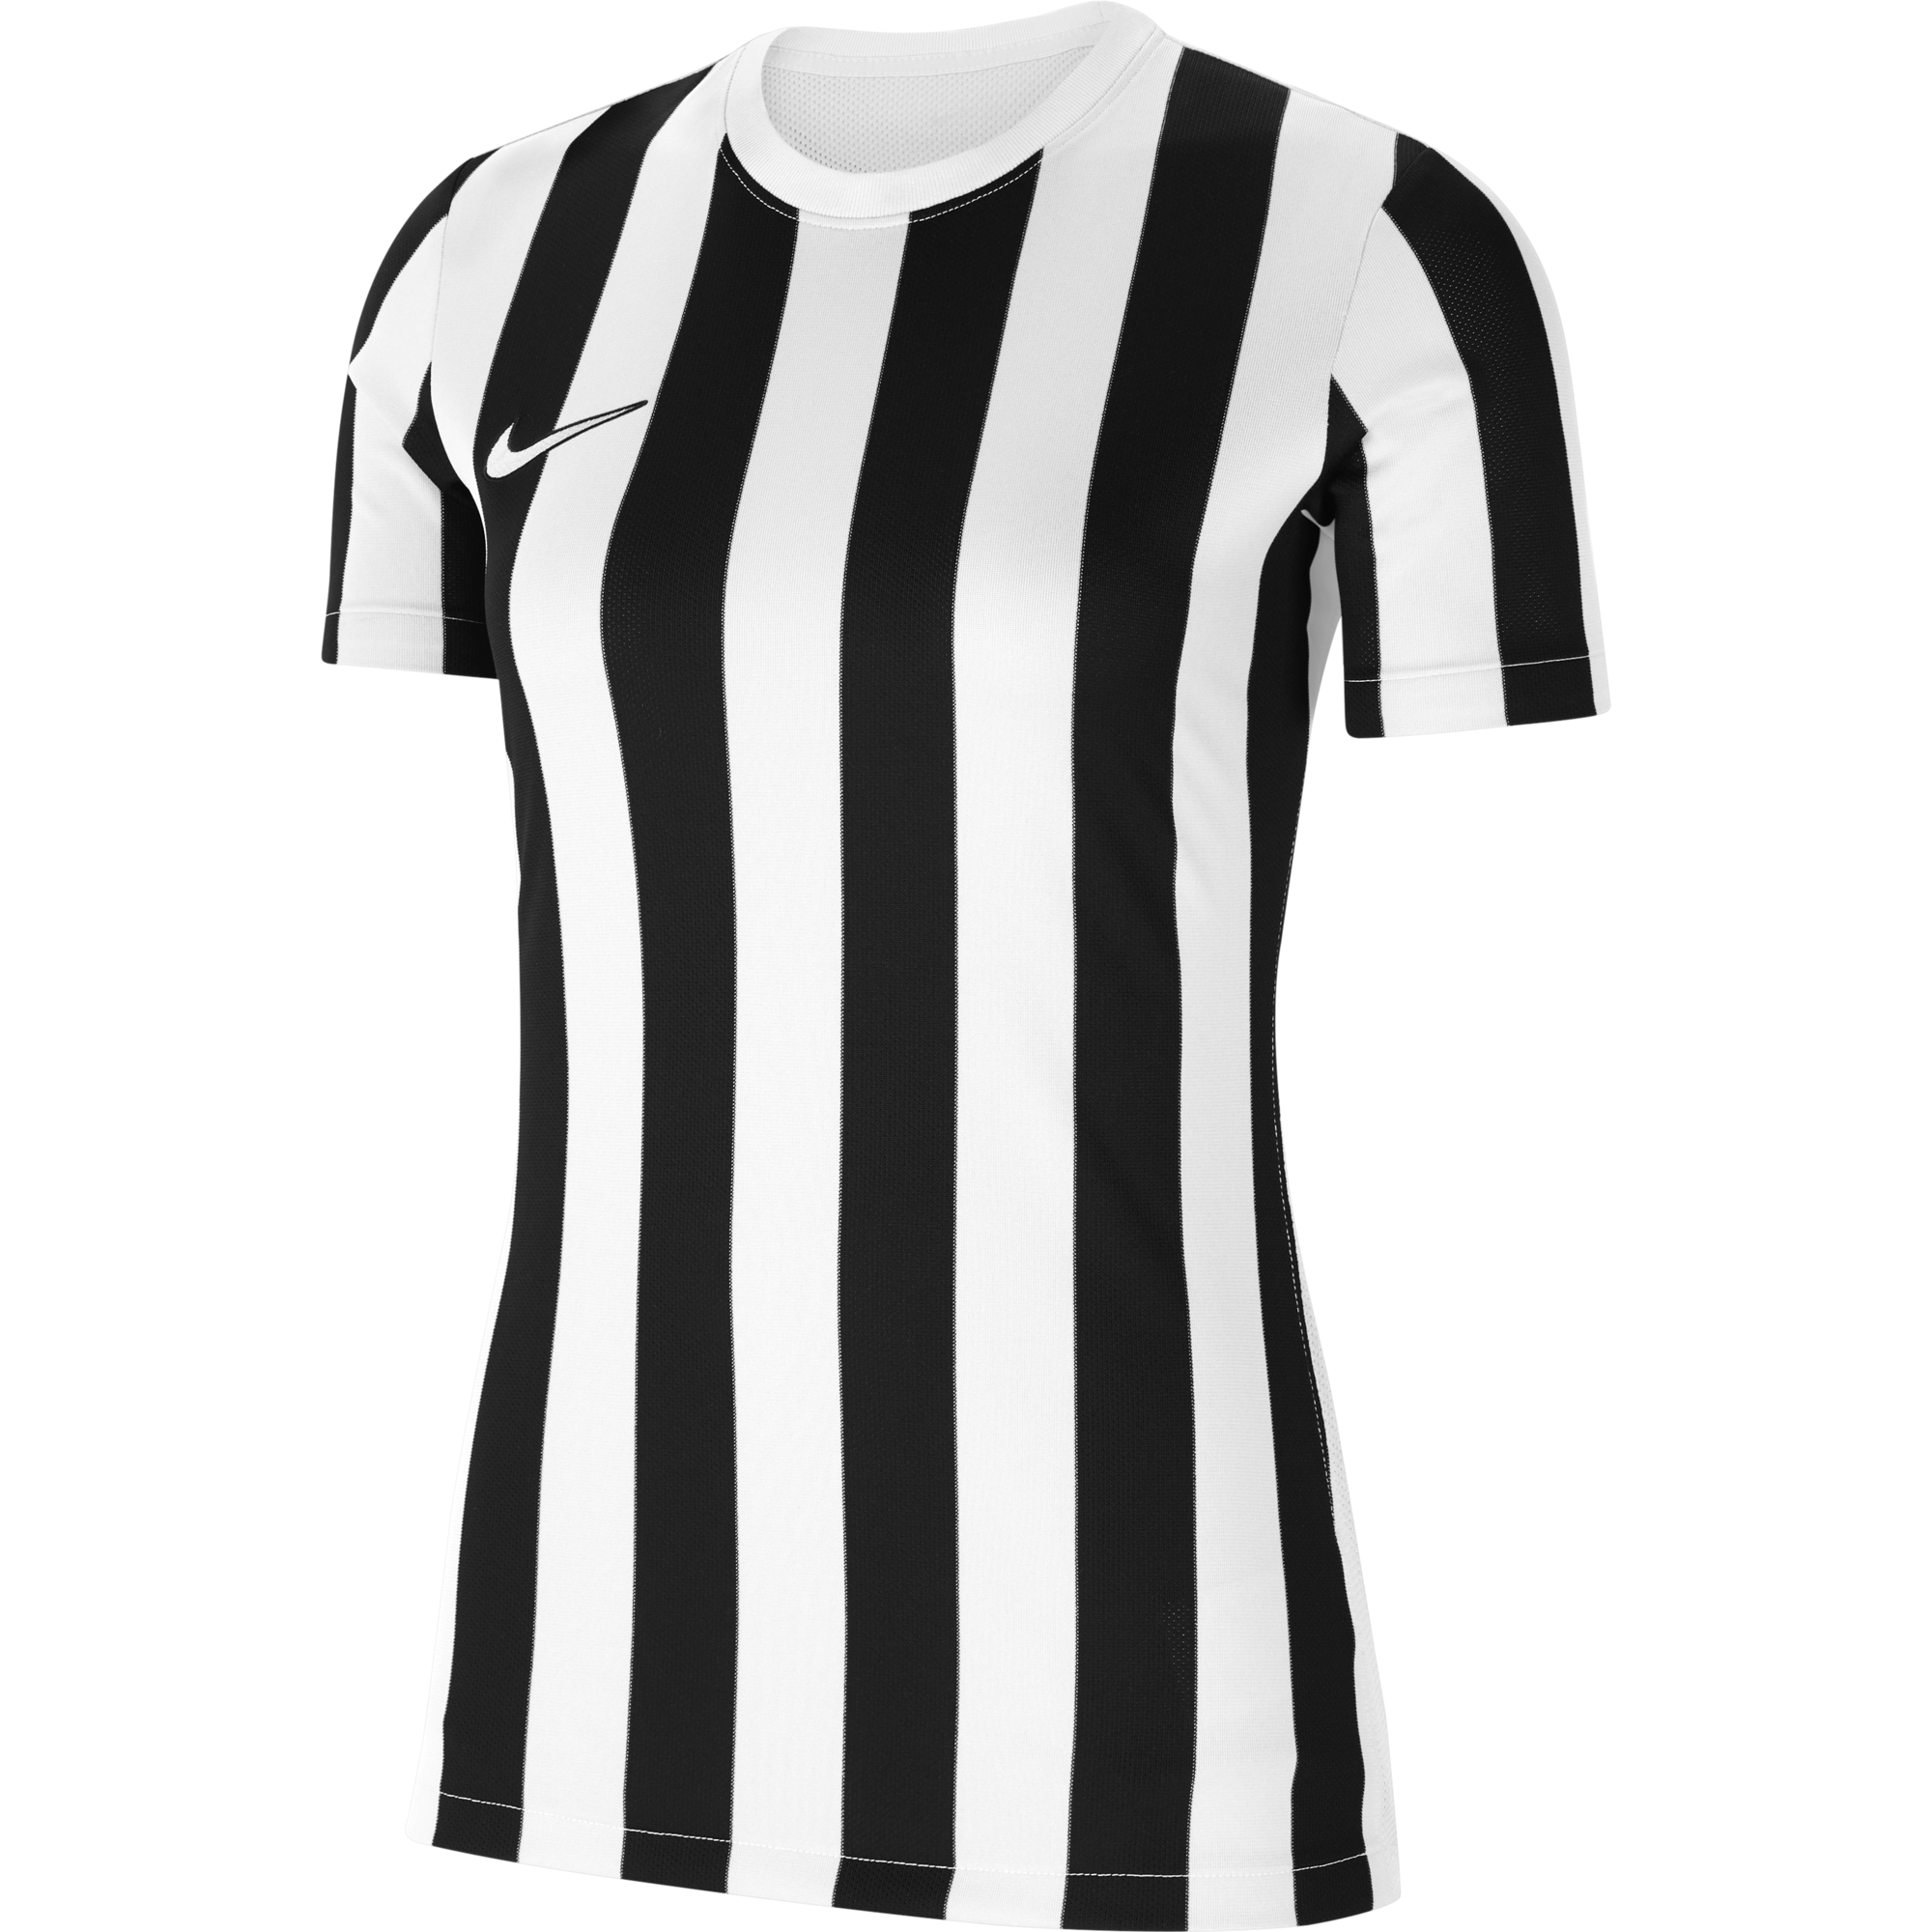 Women's Striped Division IV Jersey S/S